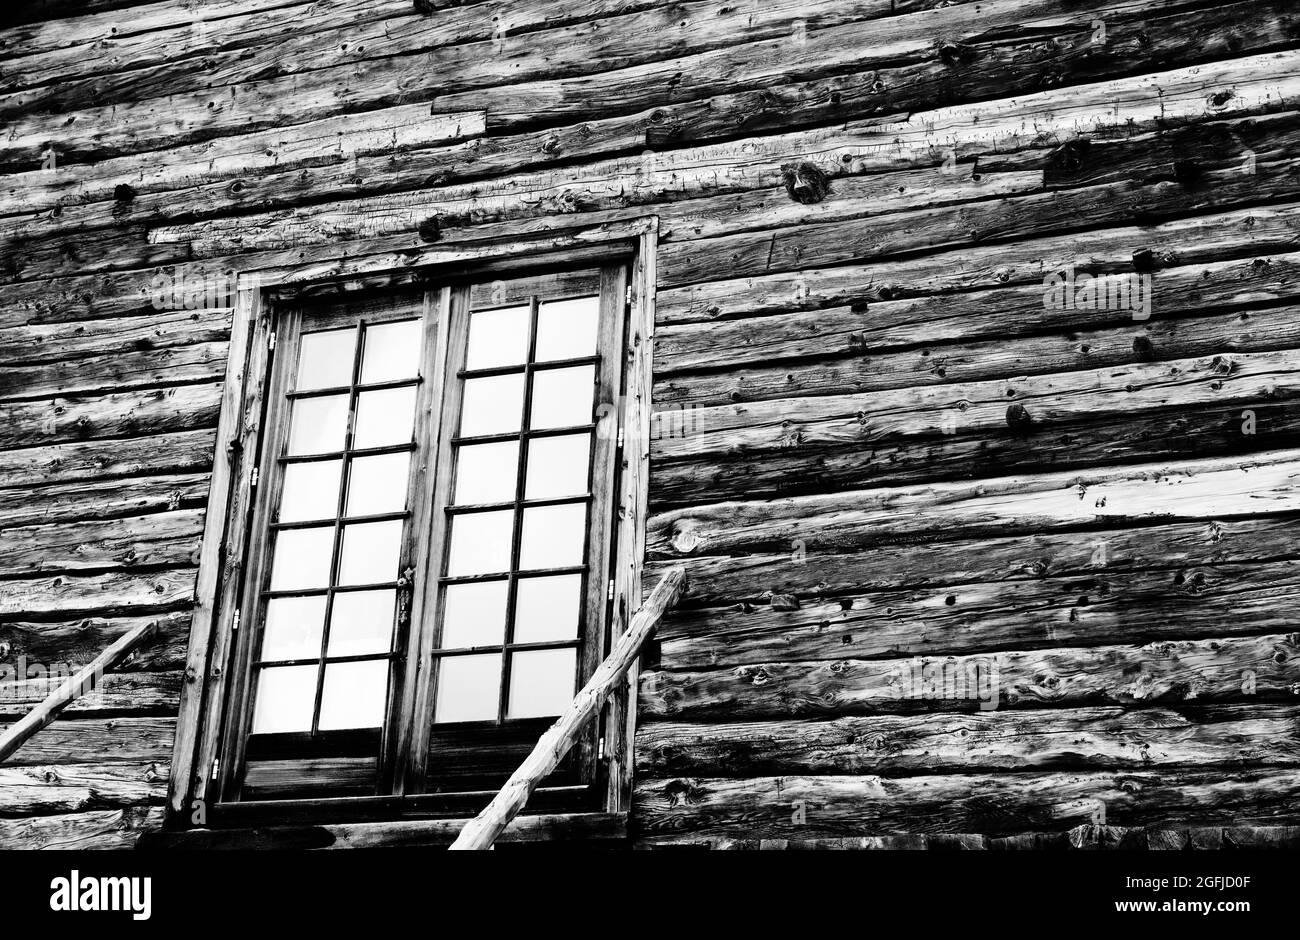 Wooden house with glazed front door and staircase with railing. Black and white toned image. High contrast. Stock Photo